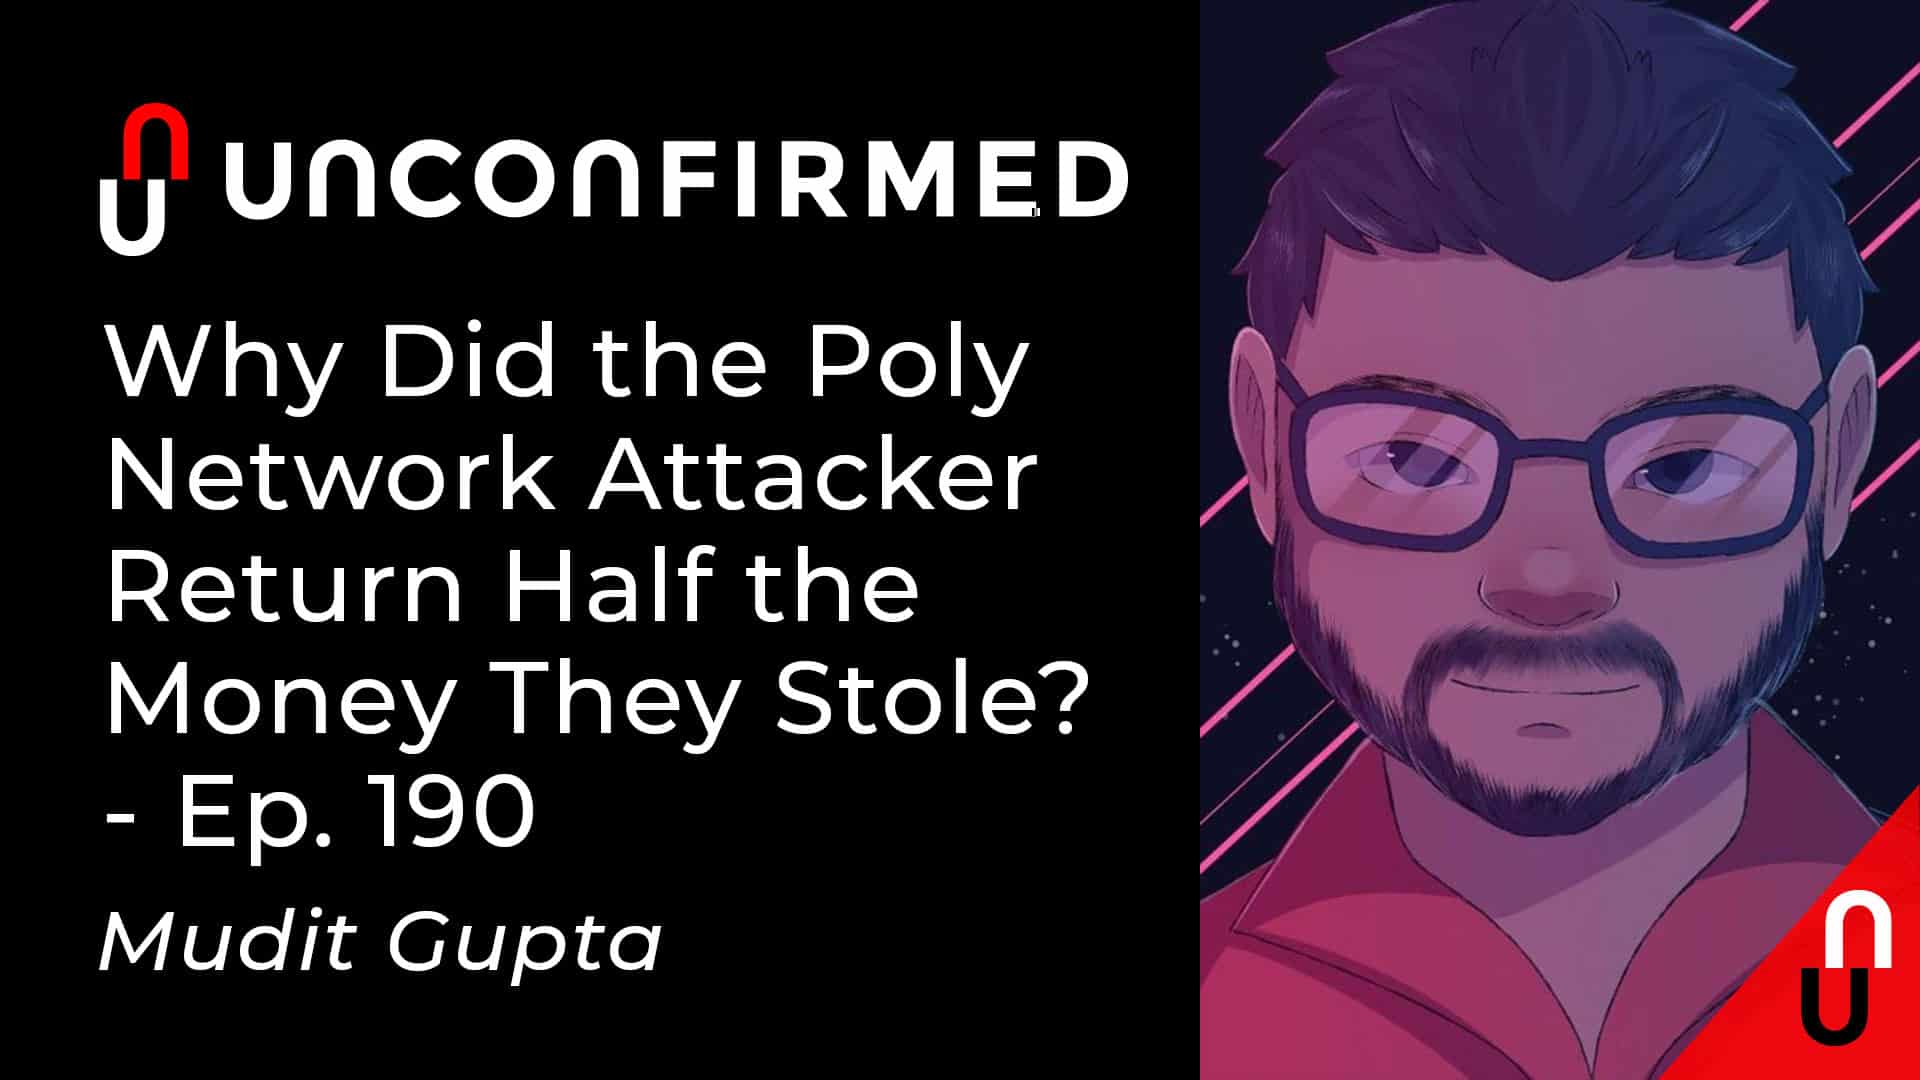 Unconfirmed - Ep.190 - Why Did the Poly Network Attacker Return Half the Money They Stole